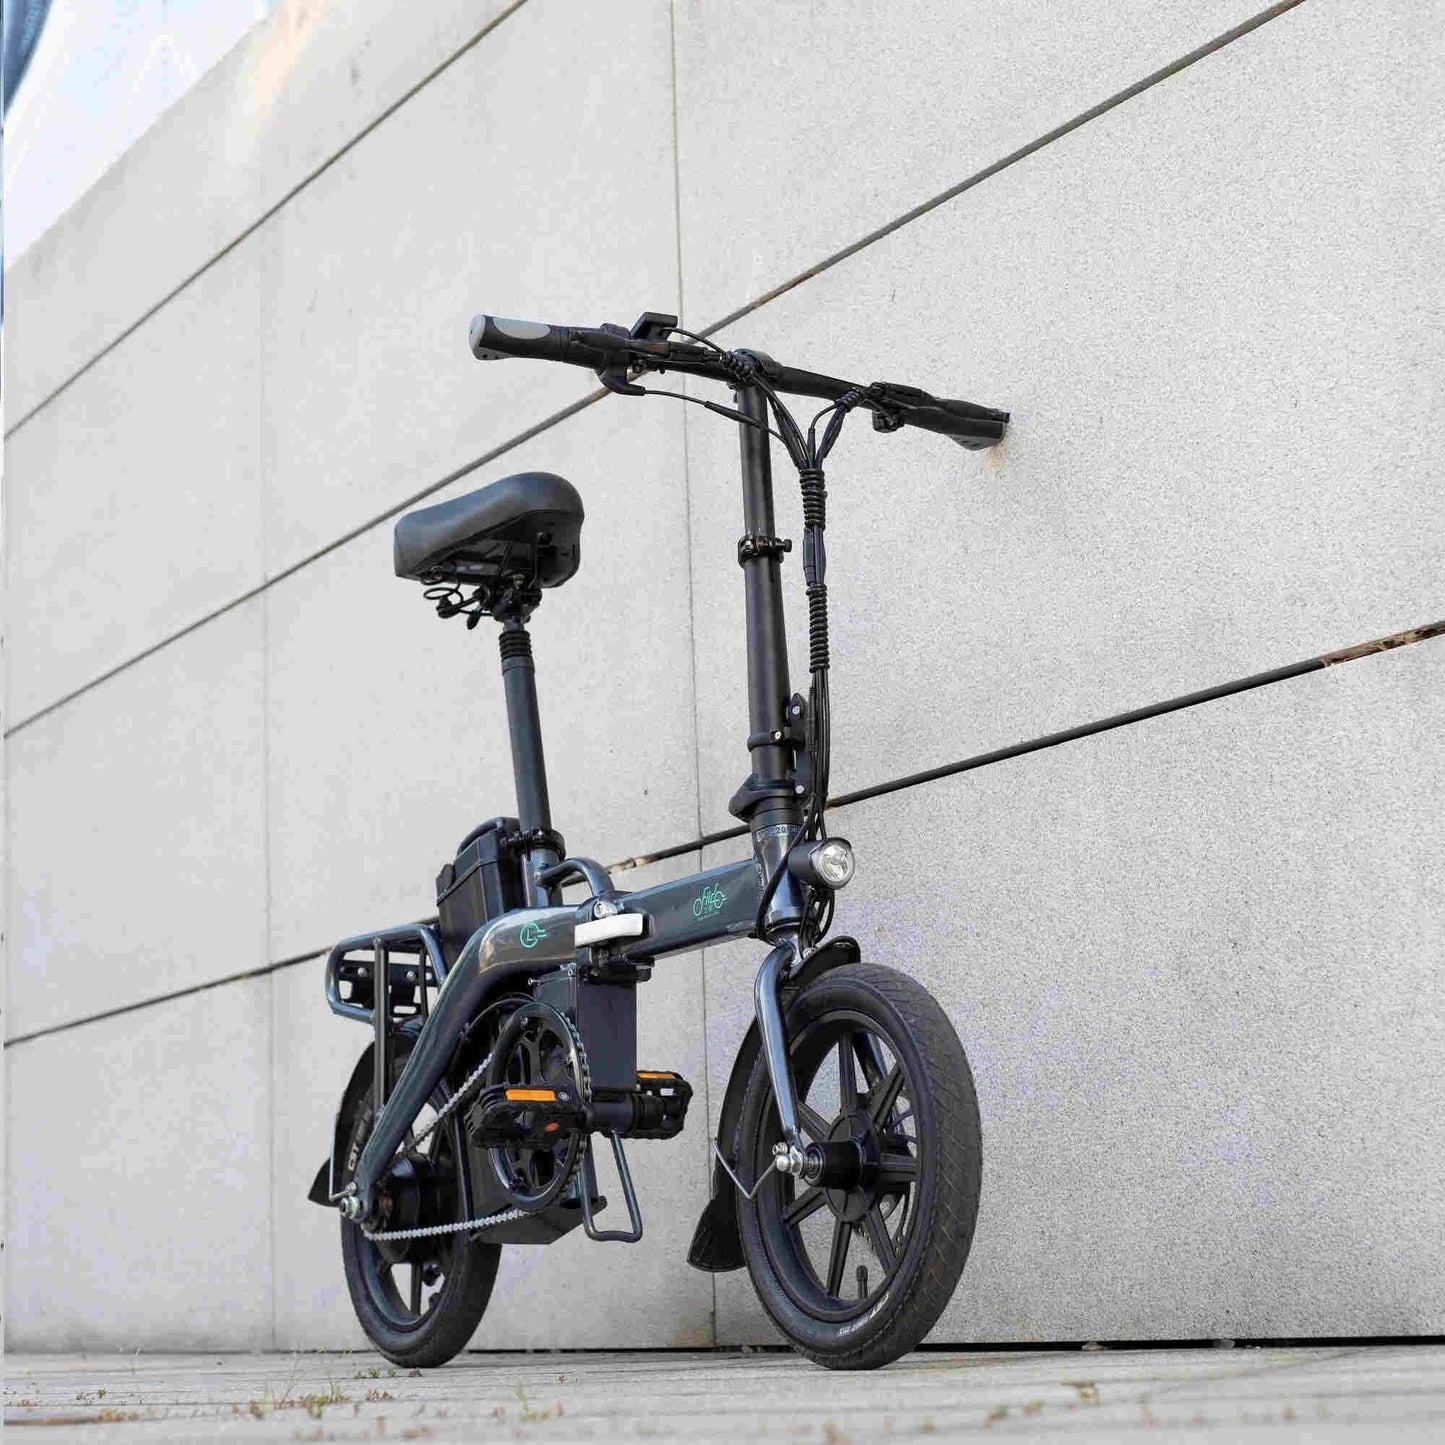 FIIDO L3 Electric Bike with mudguard and light - Pogo cycles UK -cycle to work scheme available